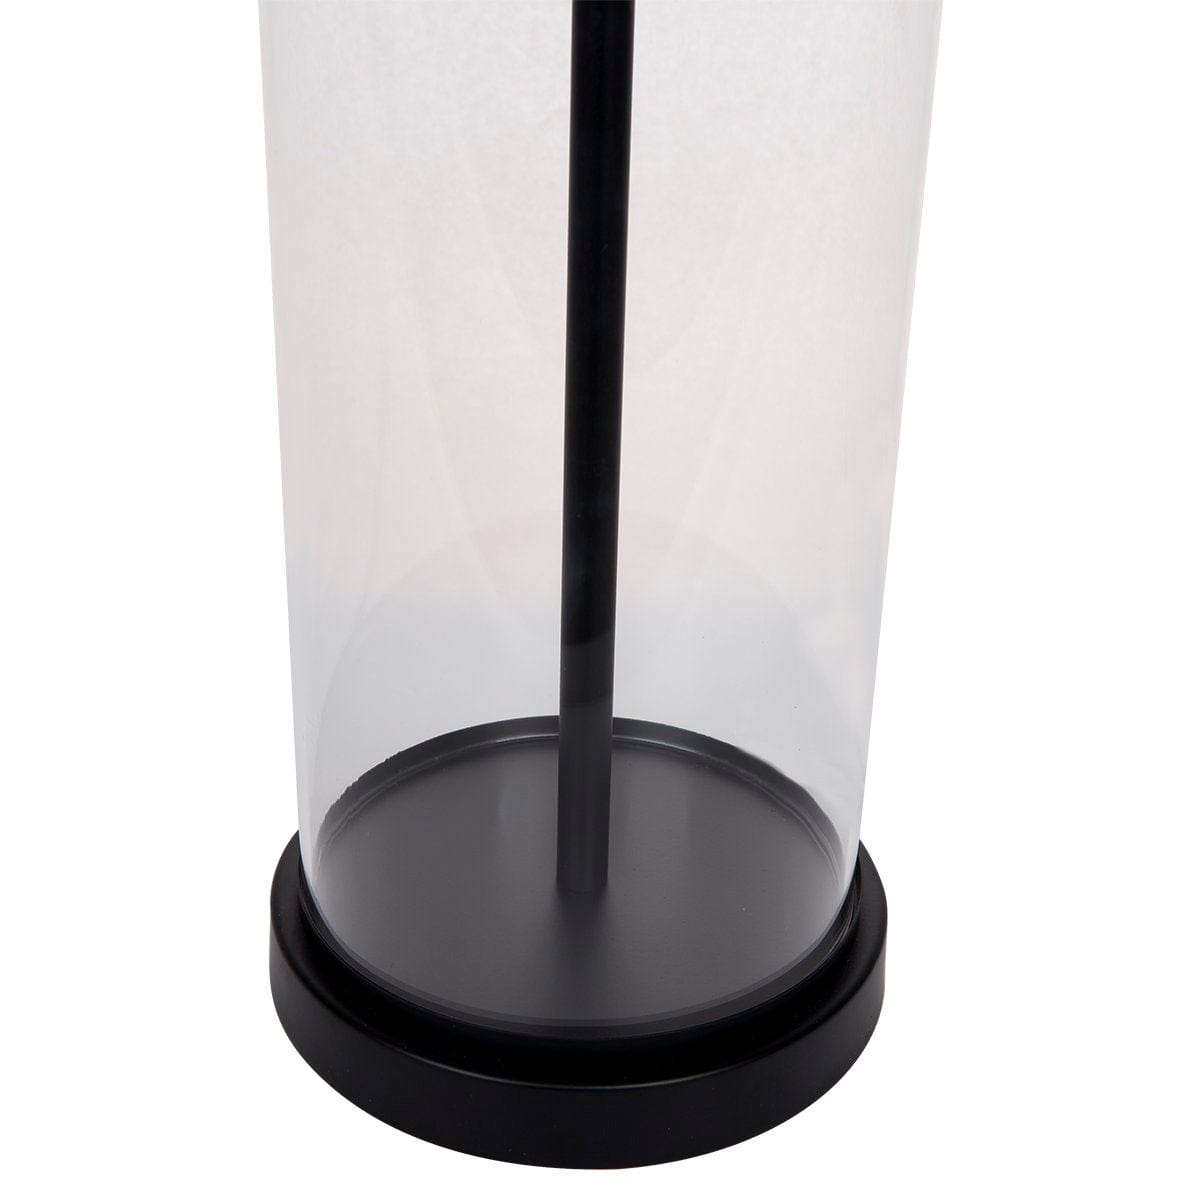 CAFE LIGHTING & LIVING Table Lamp Left Bank Table Lamp - Black w Natural Shade B12261